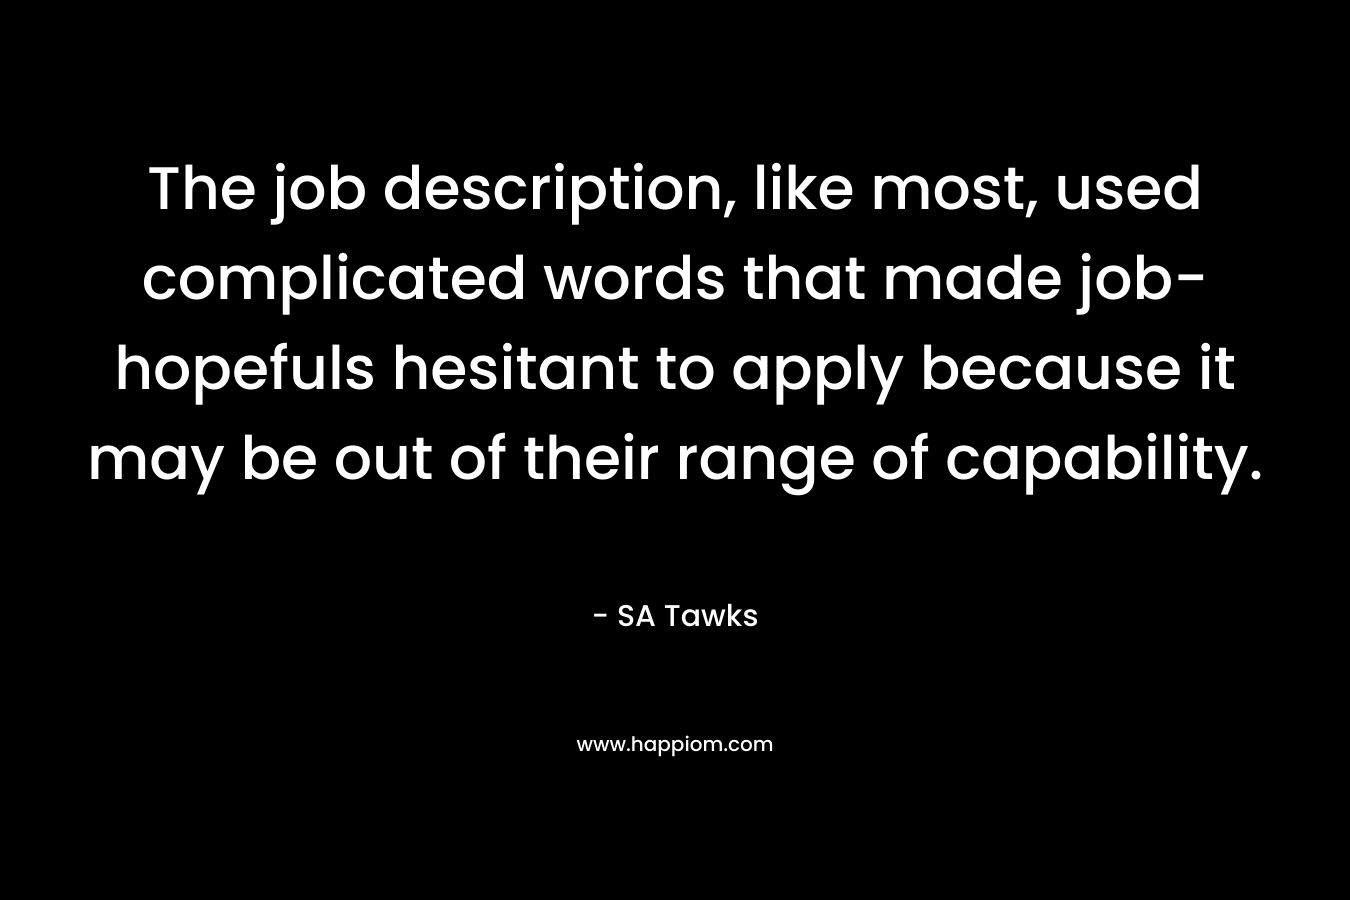 The job description, like most, used complicated words that made job-hopefuls hesitant to apply because it may be out of their range of capability. – SA Tawks